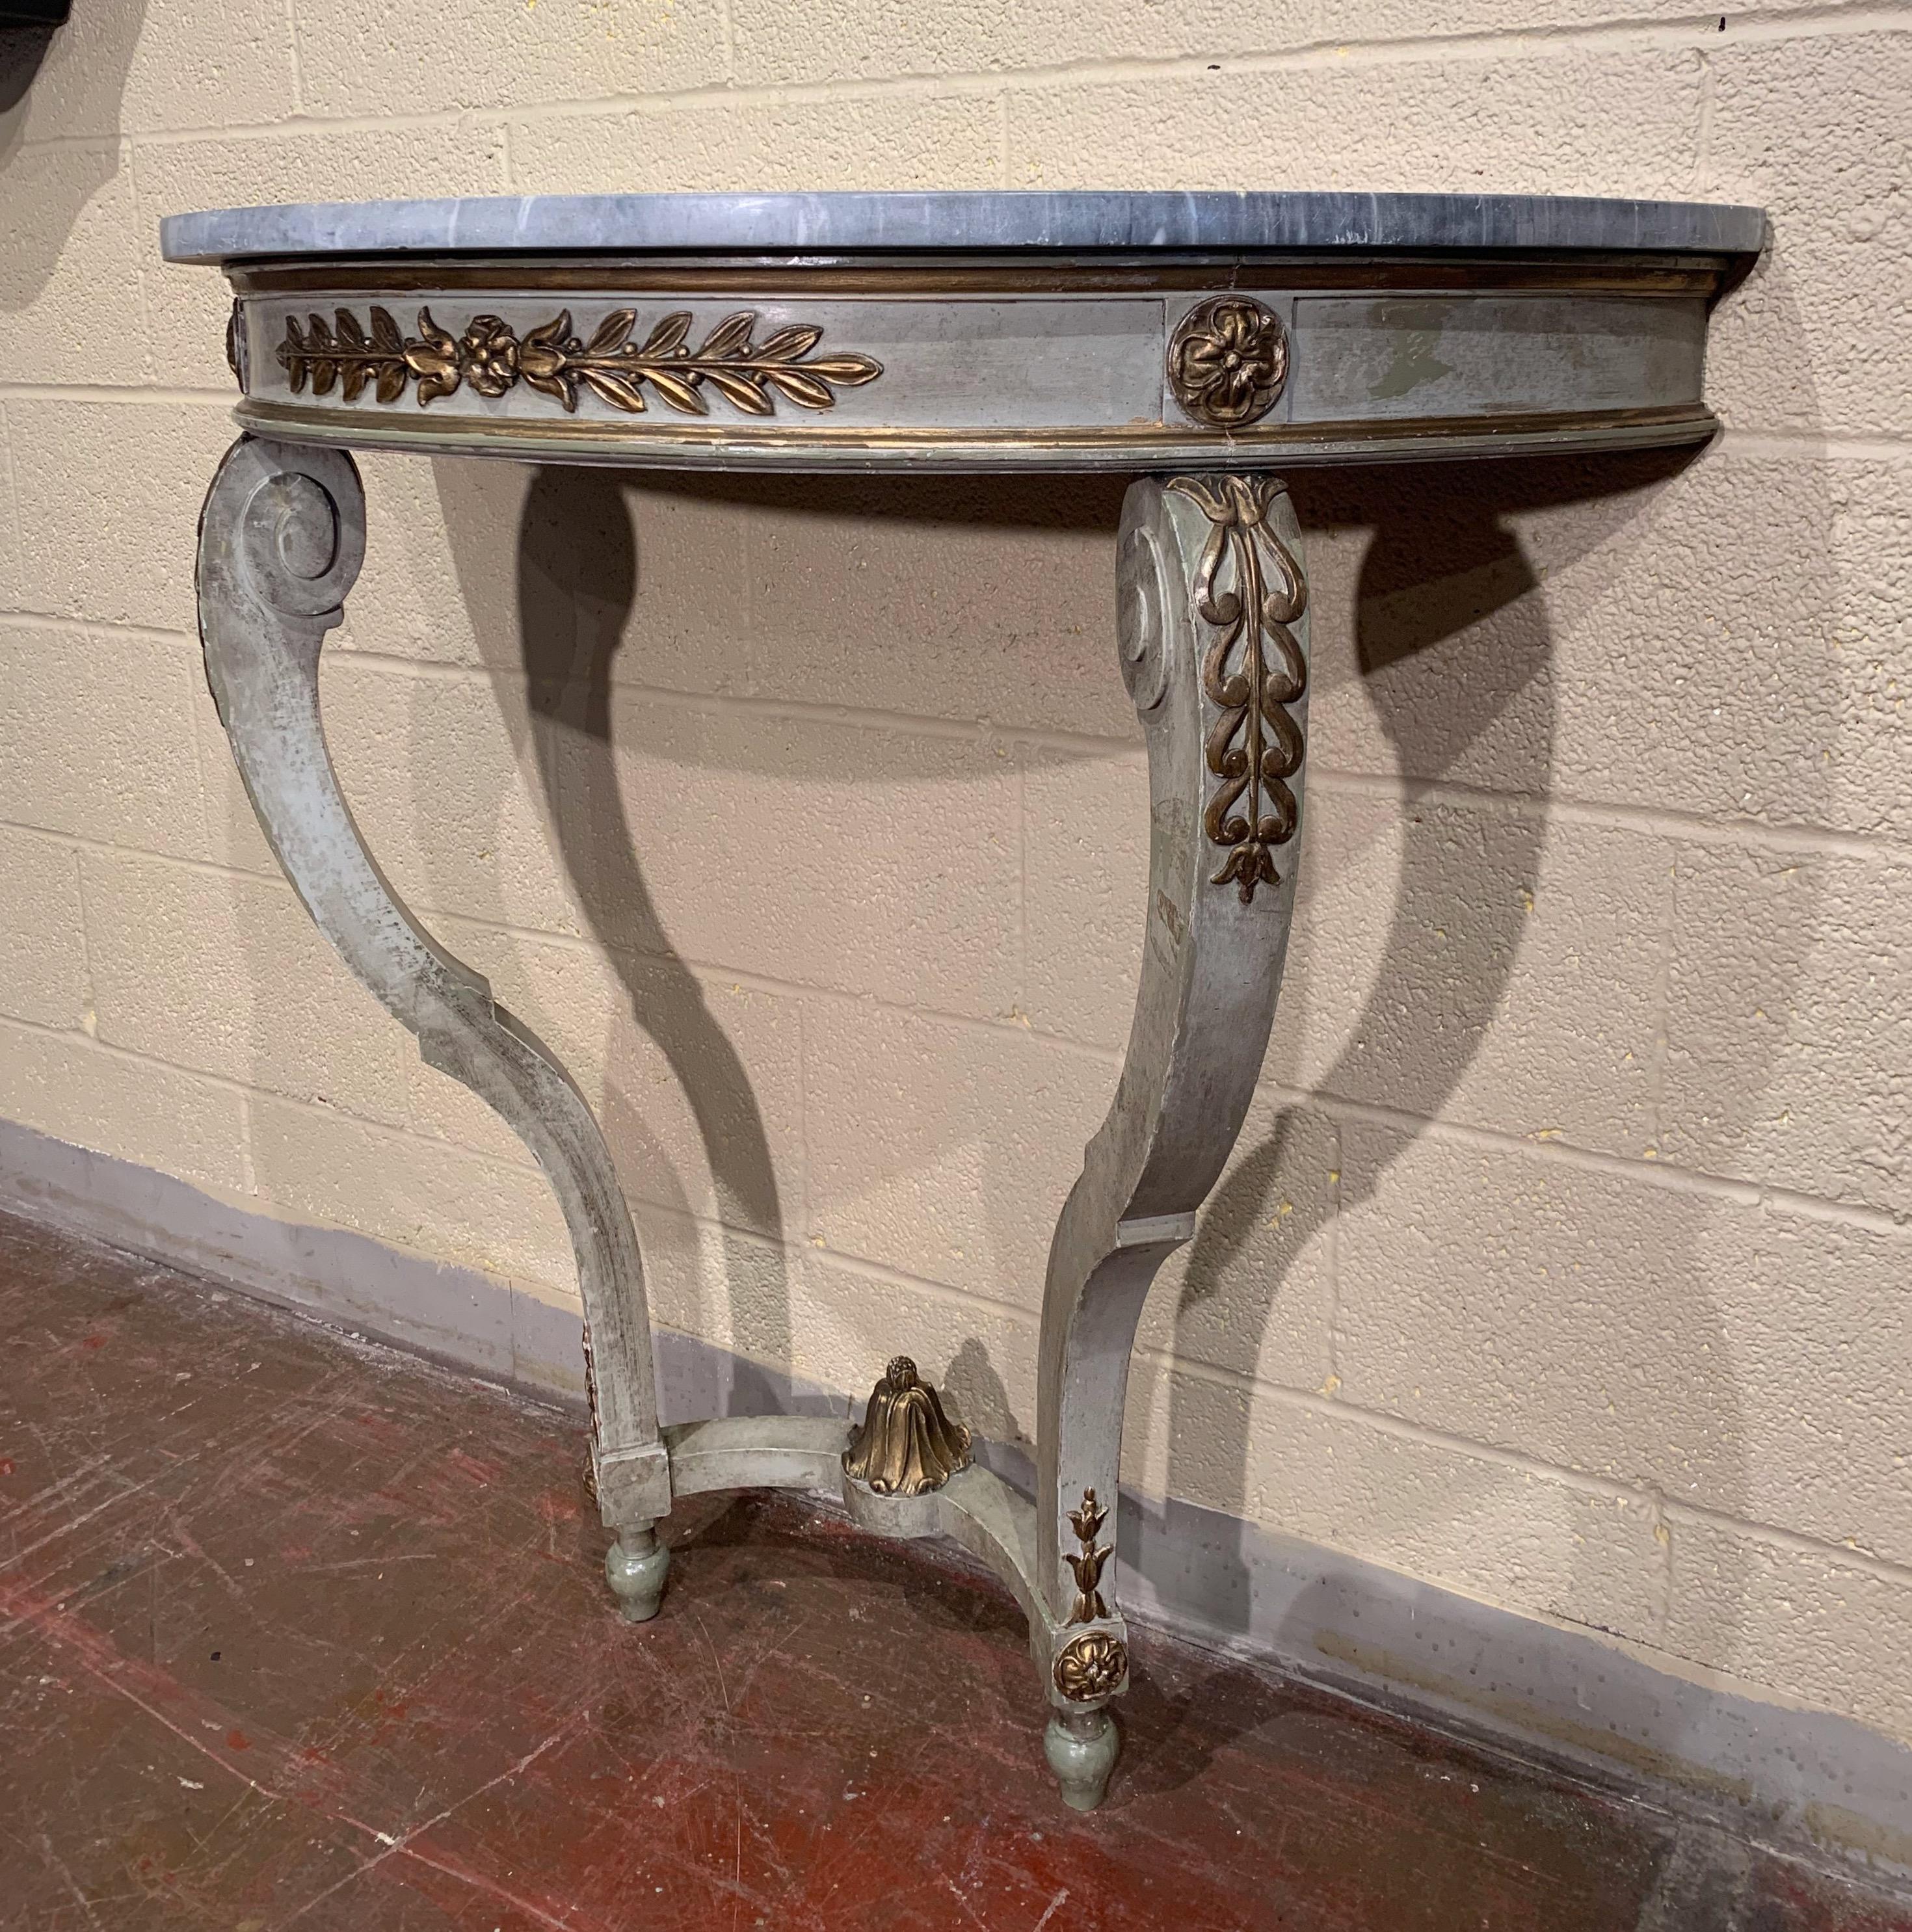 This antique painted console was crafted in France, circa 1860; shaped as a half moon and standing on cabriole legs decorated with acanthus leaves, the table features foliage carving on the bombe apron and embellished with floral medallions in the